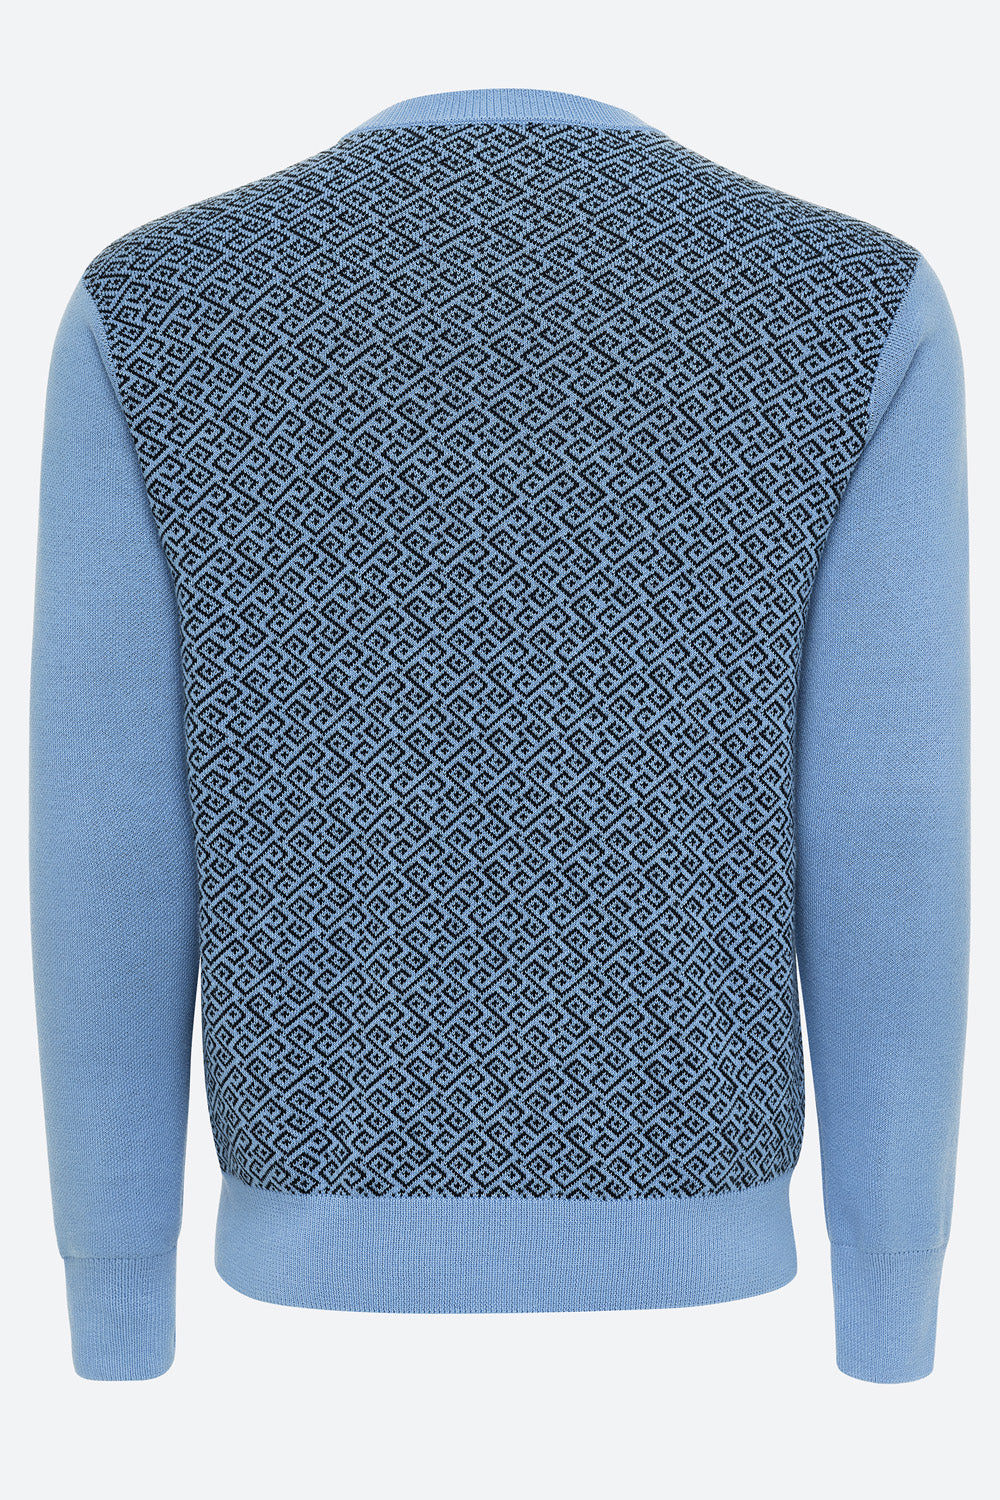 Ivo Cotton Knit Logo Back Sweater in Light Blue and Black